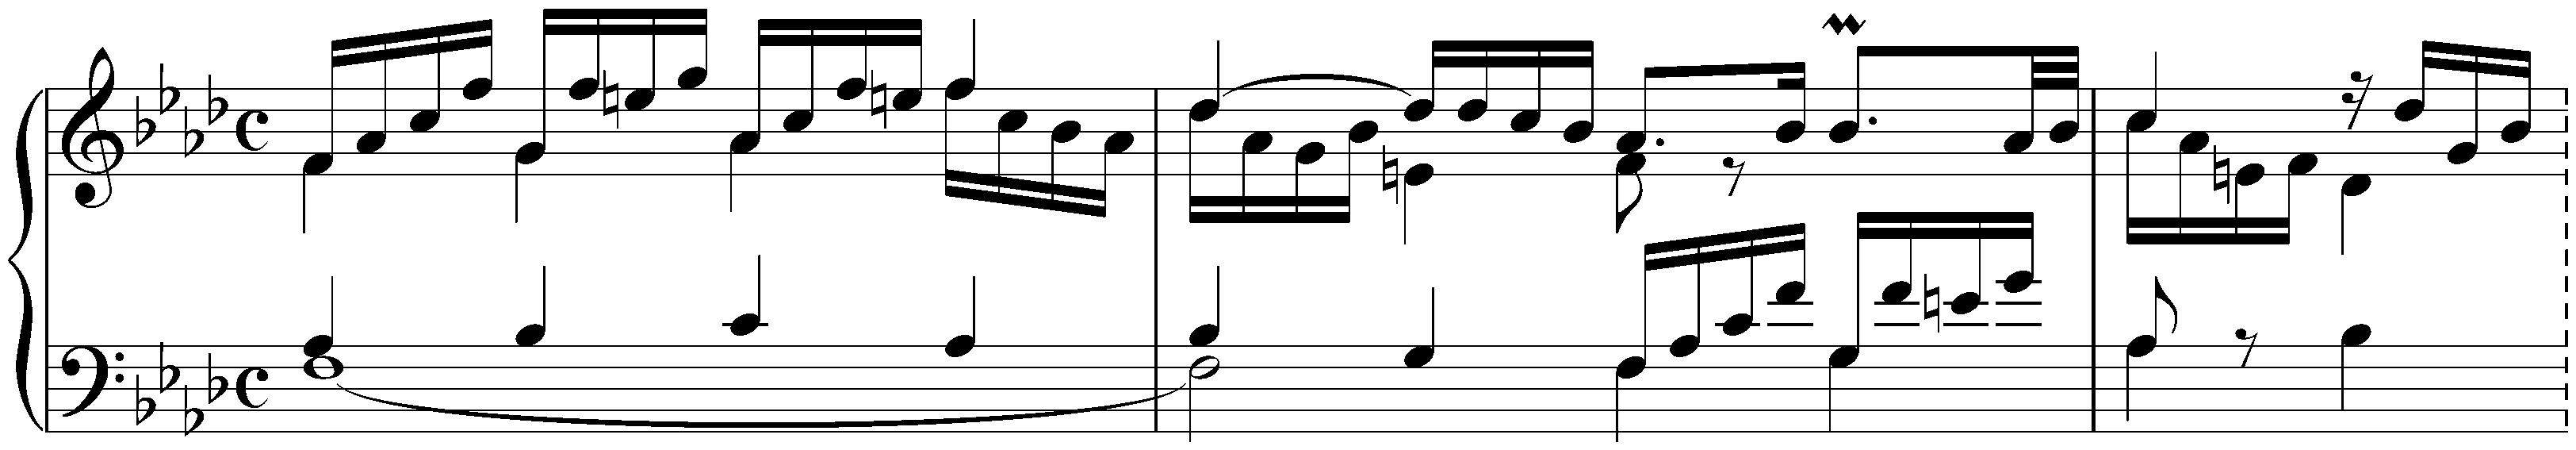 The Well-Tempered Clavier, Book 1, BWV 846–869; 12. F minor, BWV 857, Prelude